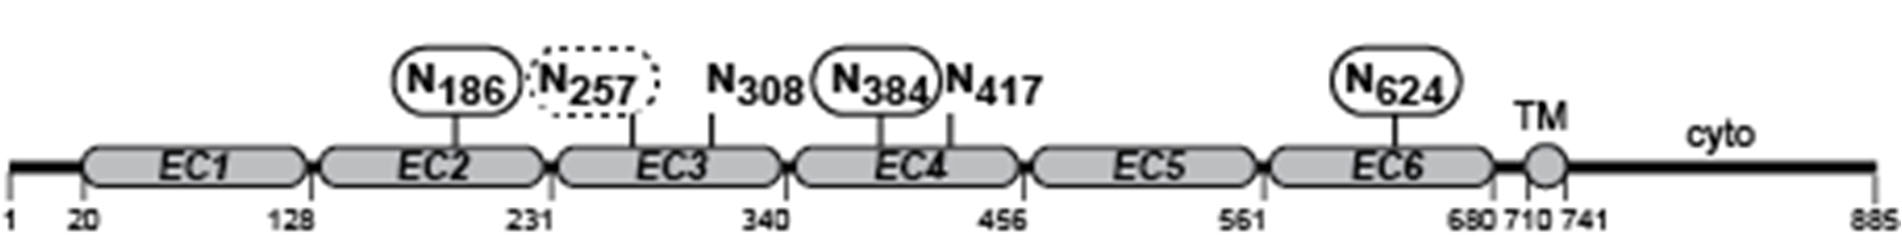 Diagram of the sequence of human CDHR3